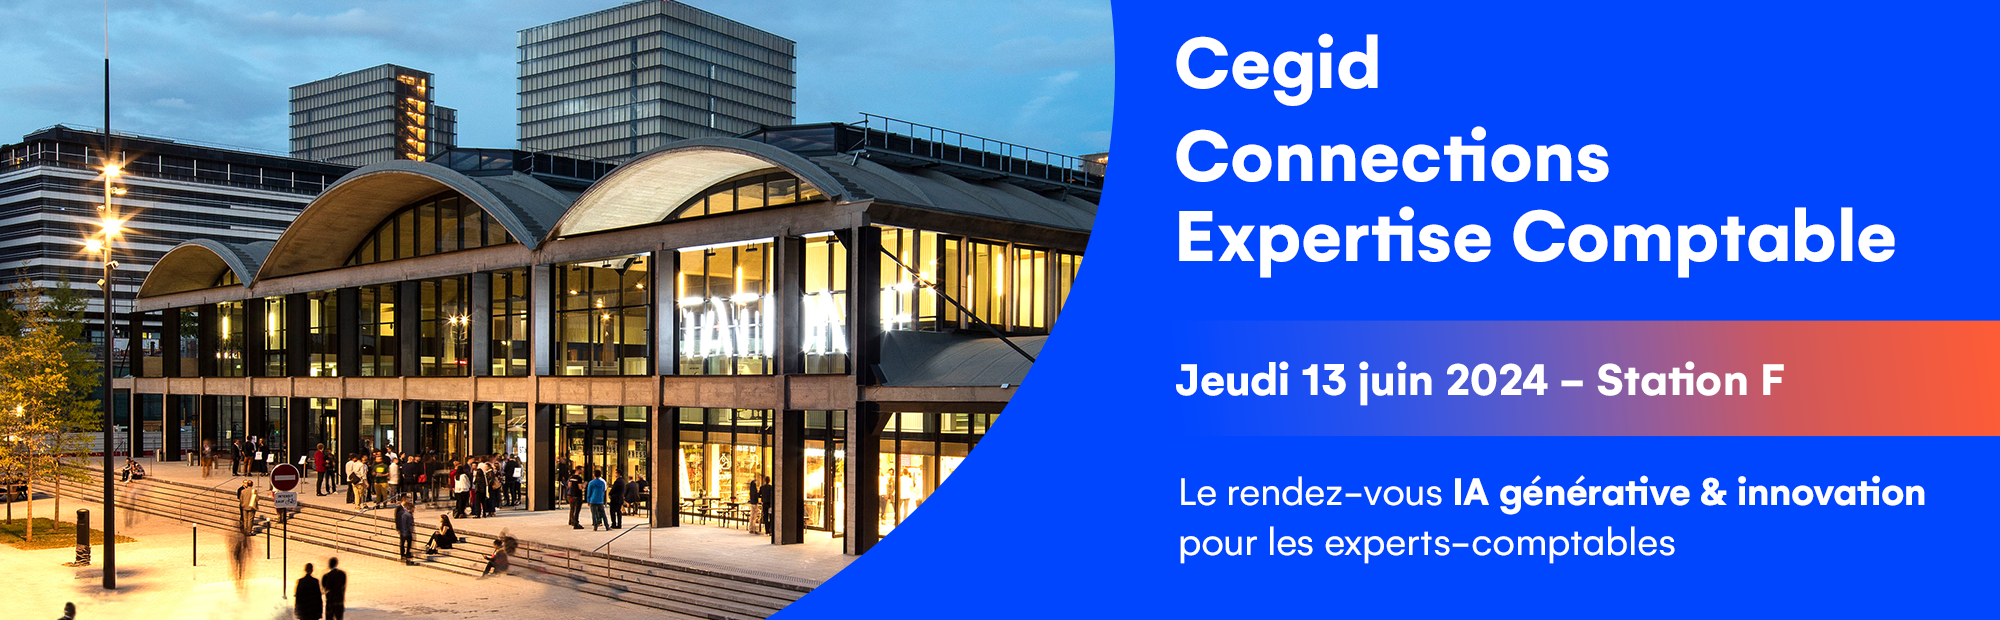 Cegid Connections Expertise comptable